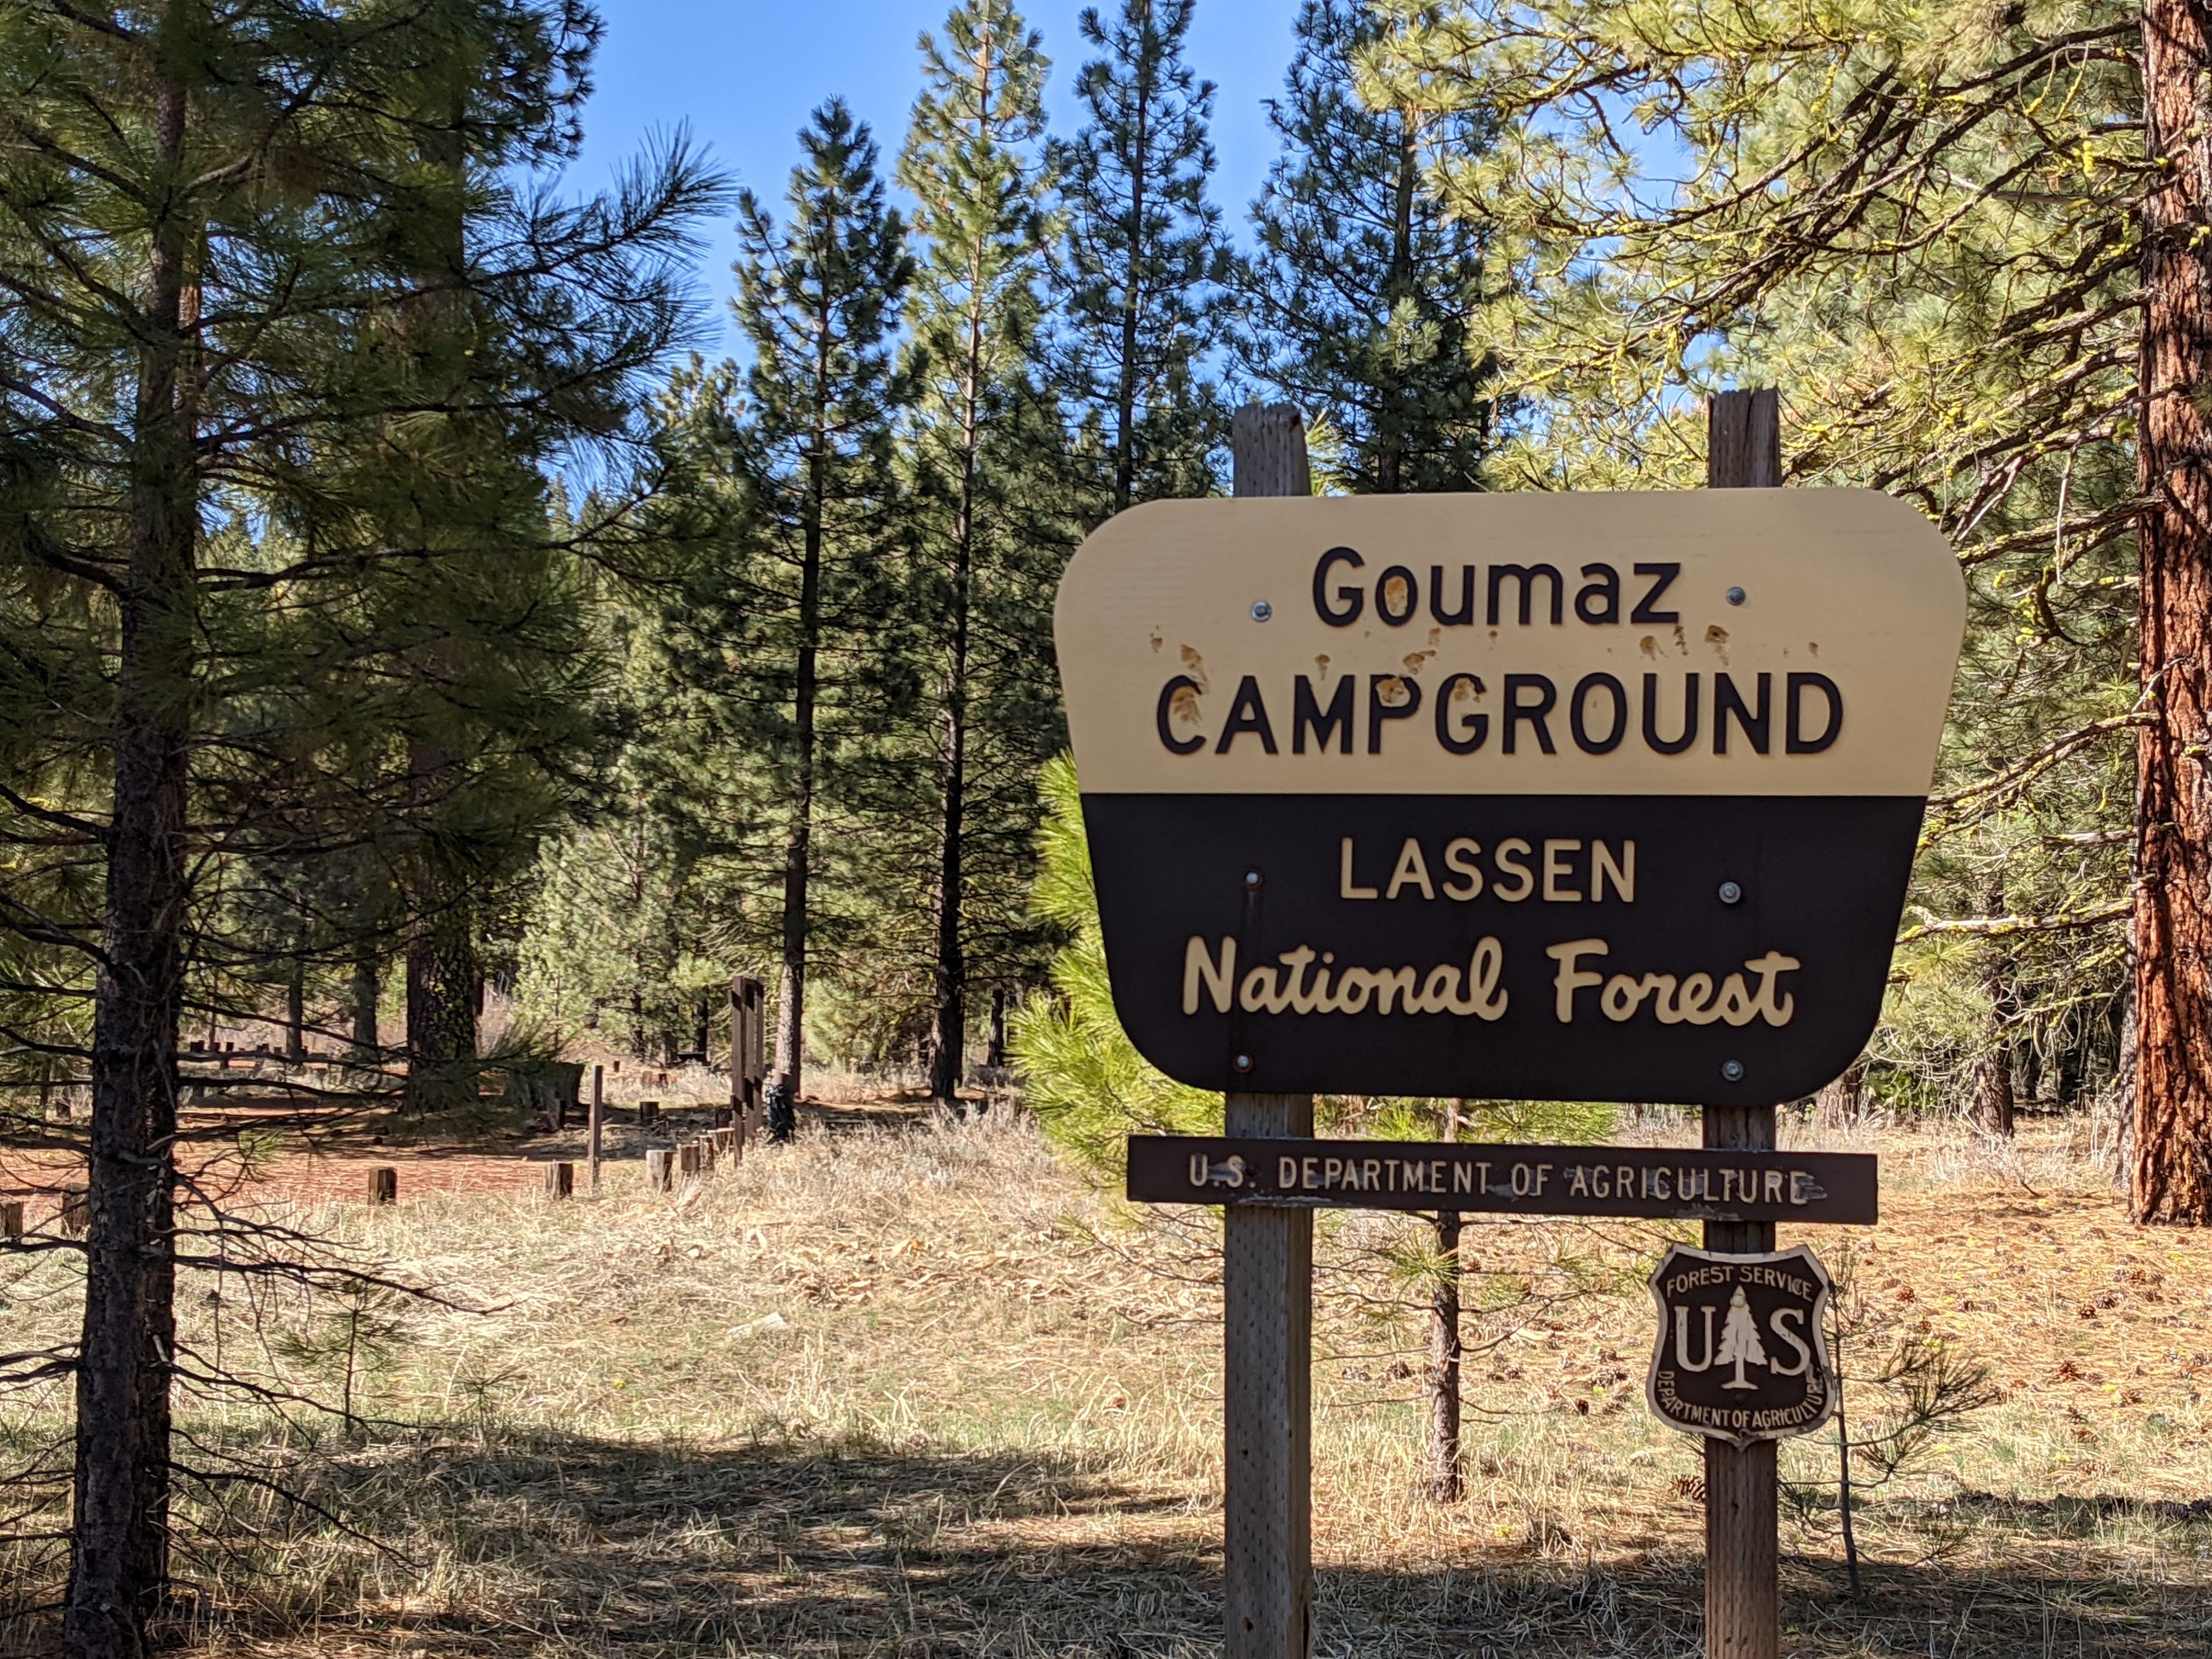 Camper submitted image from Goumaz Campground - Lassen National Forest - 1